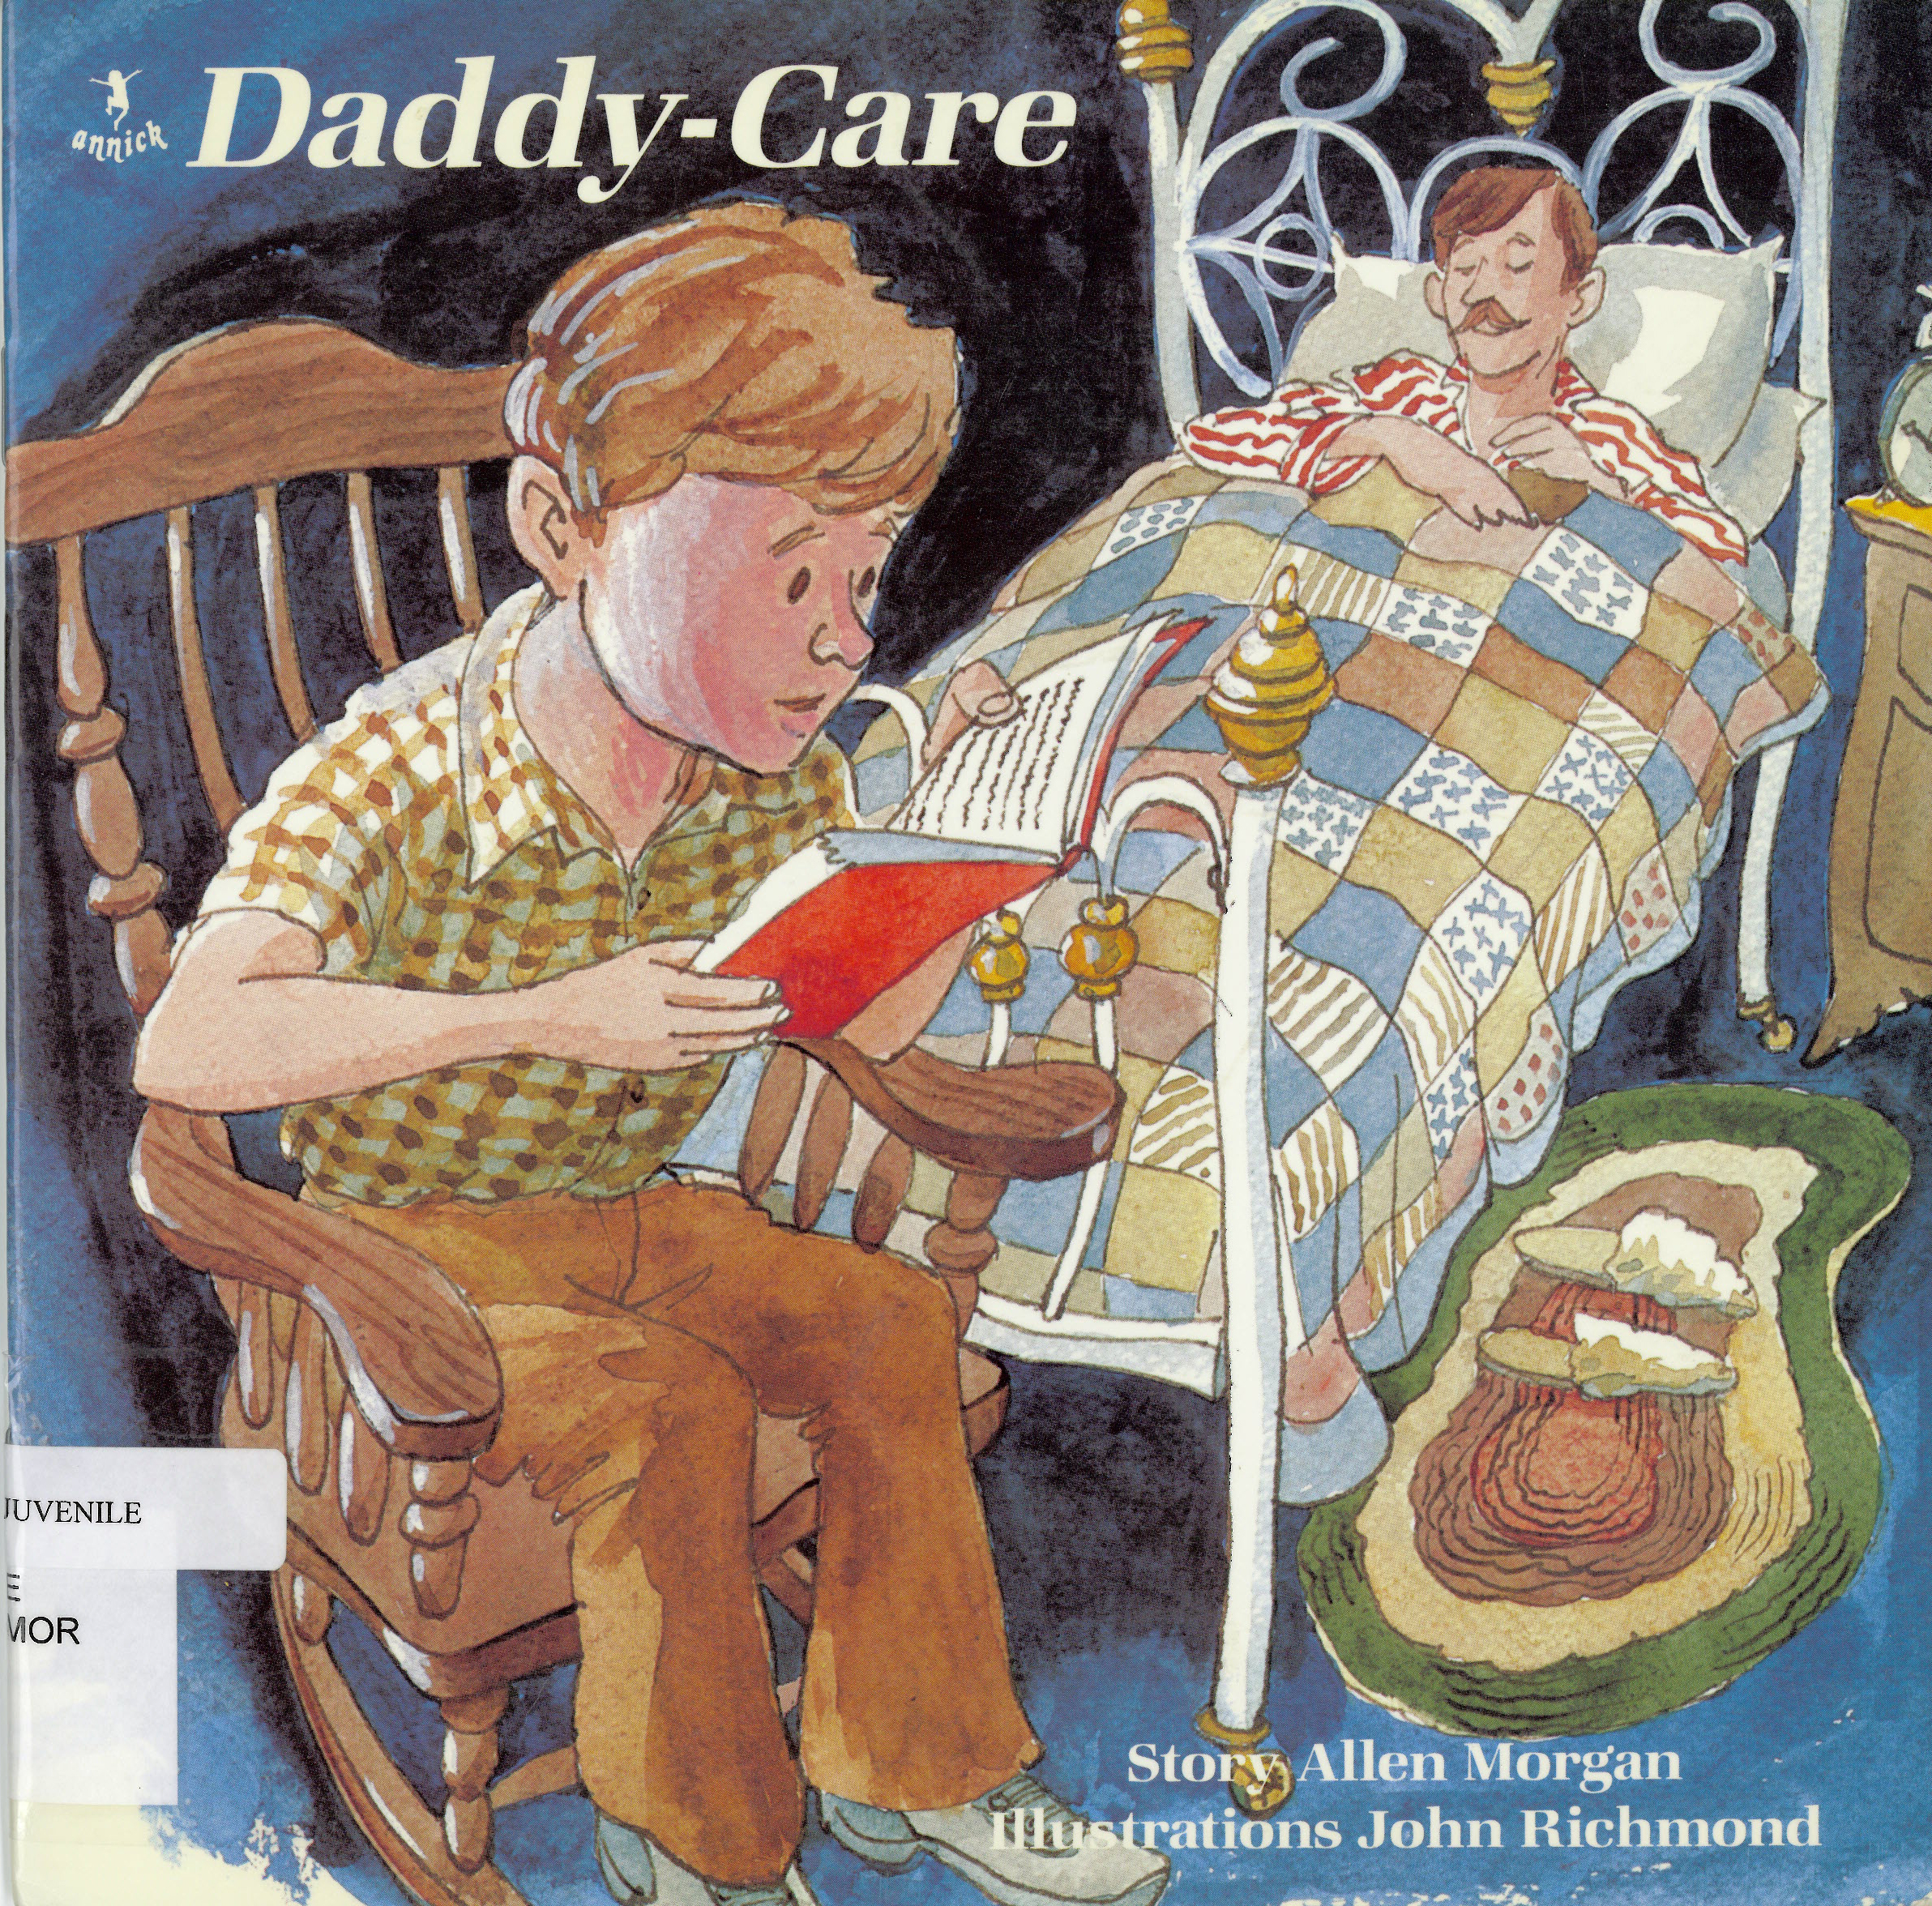 Daddy-care